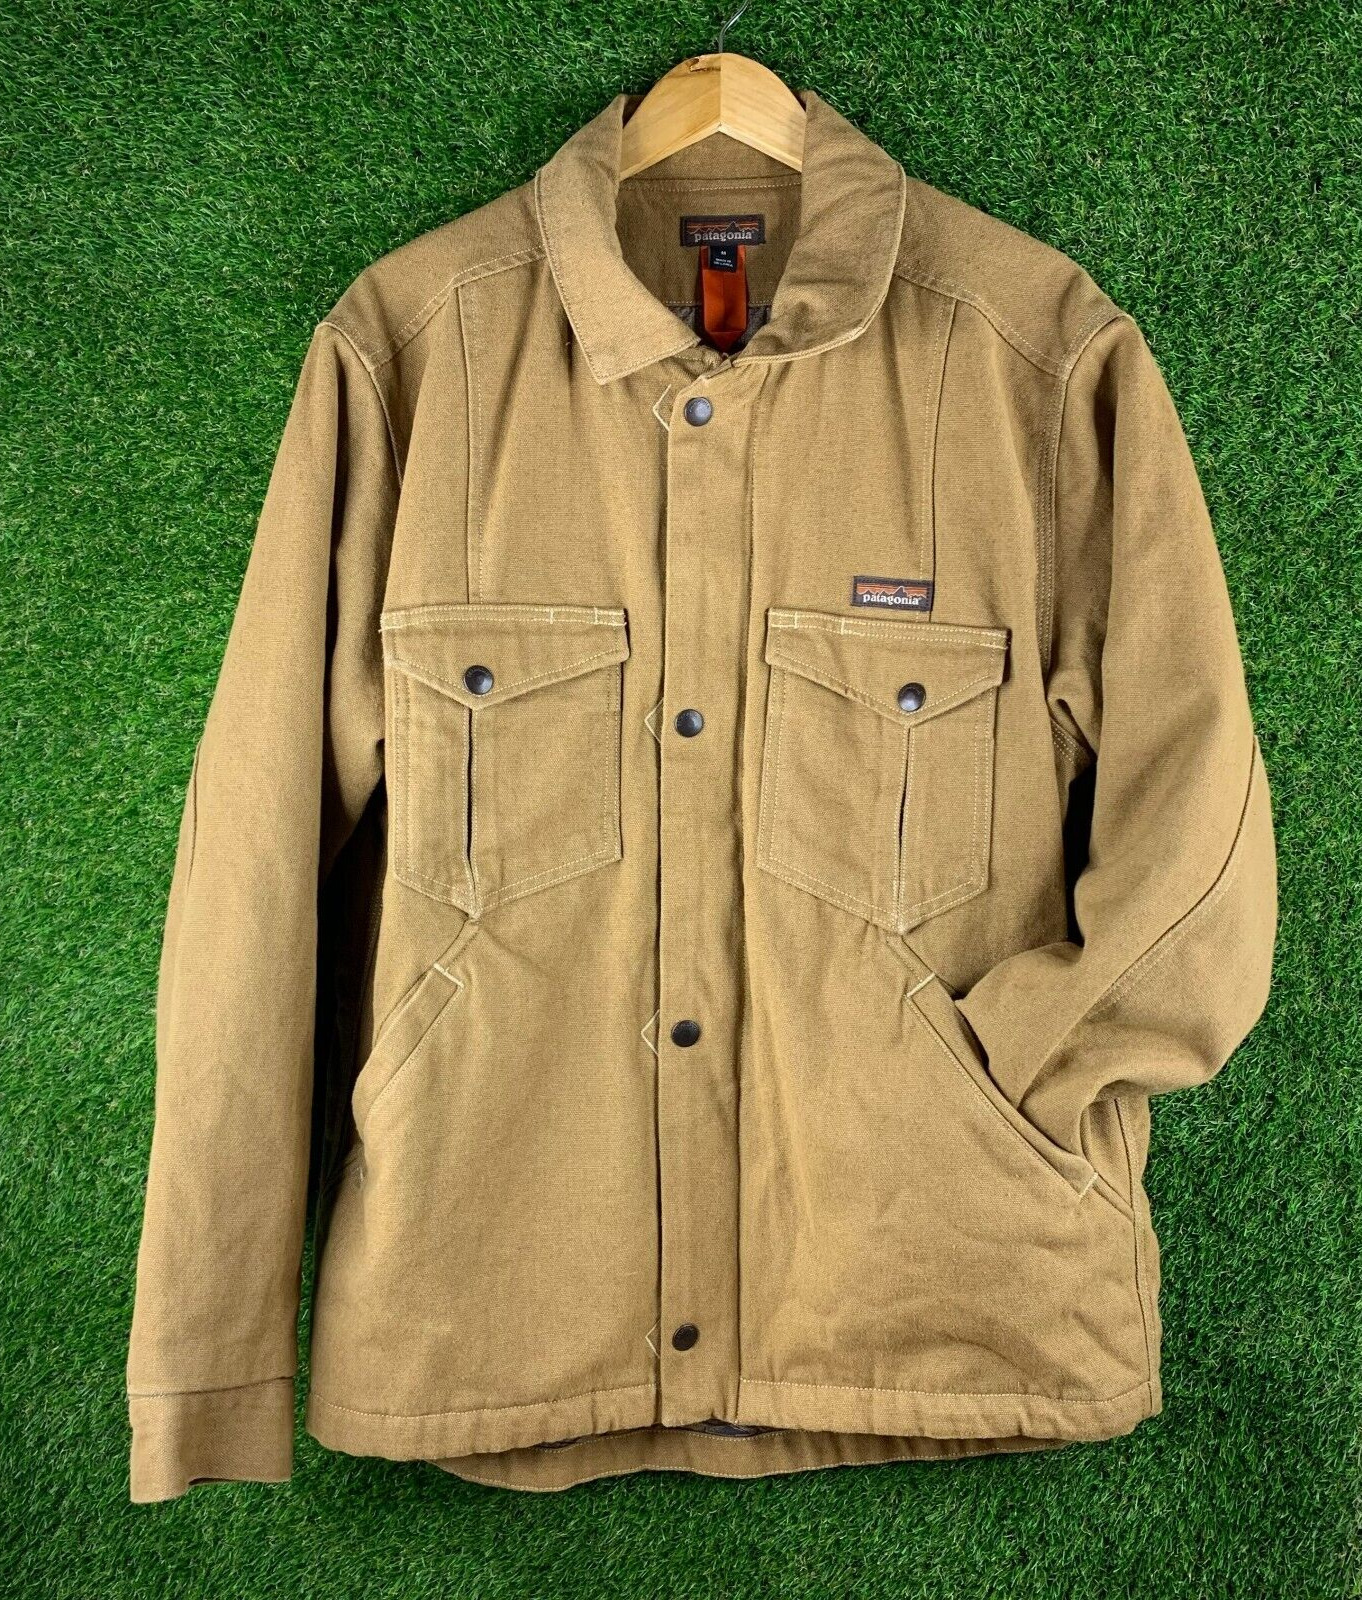 Patagonia Iron Forge Hemp Canvas Insulated Ranch Barn Jacket Brown Men’s M Med